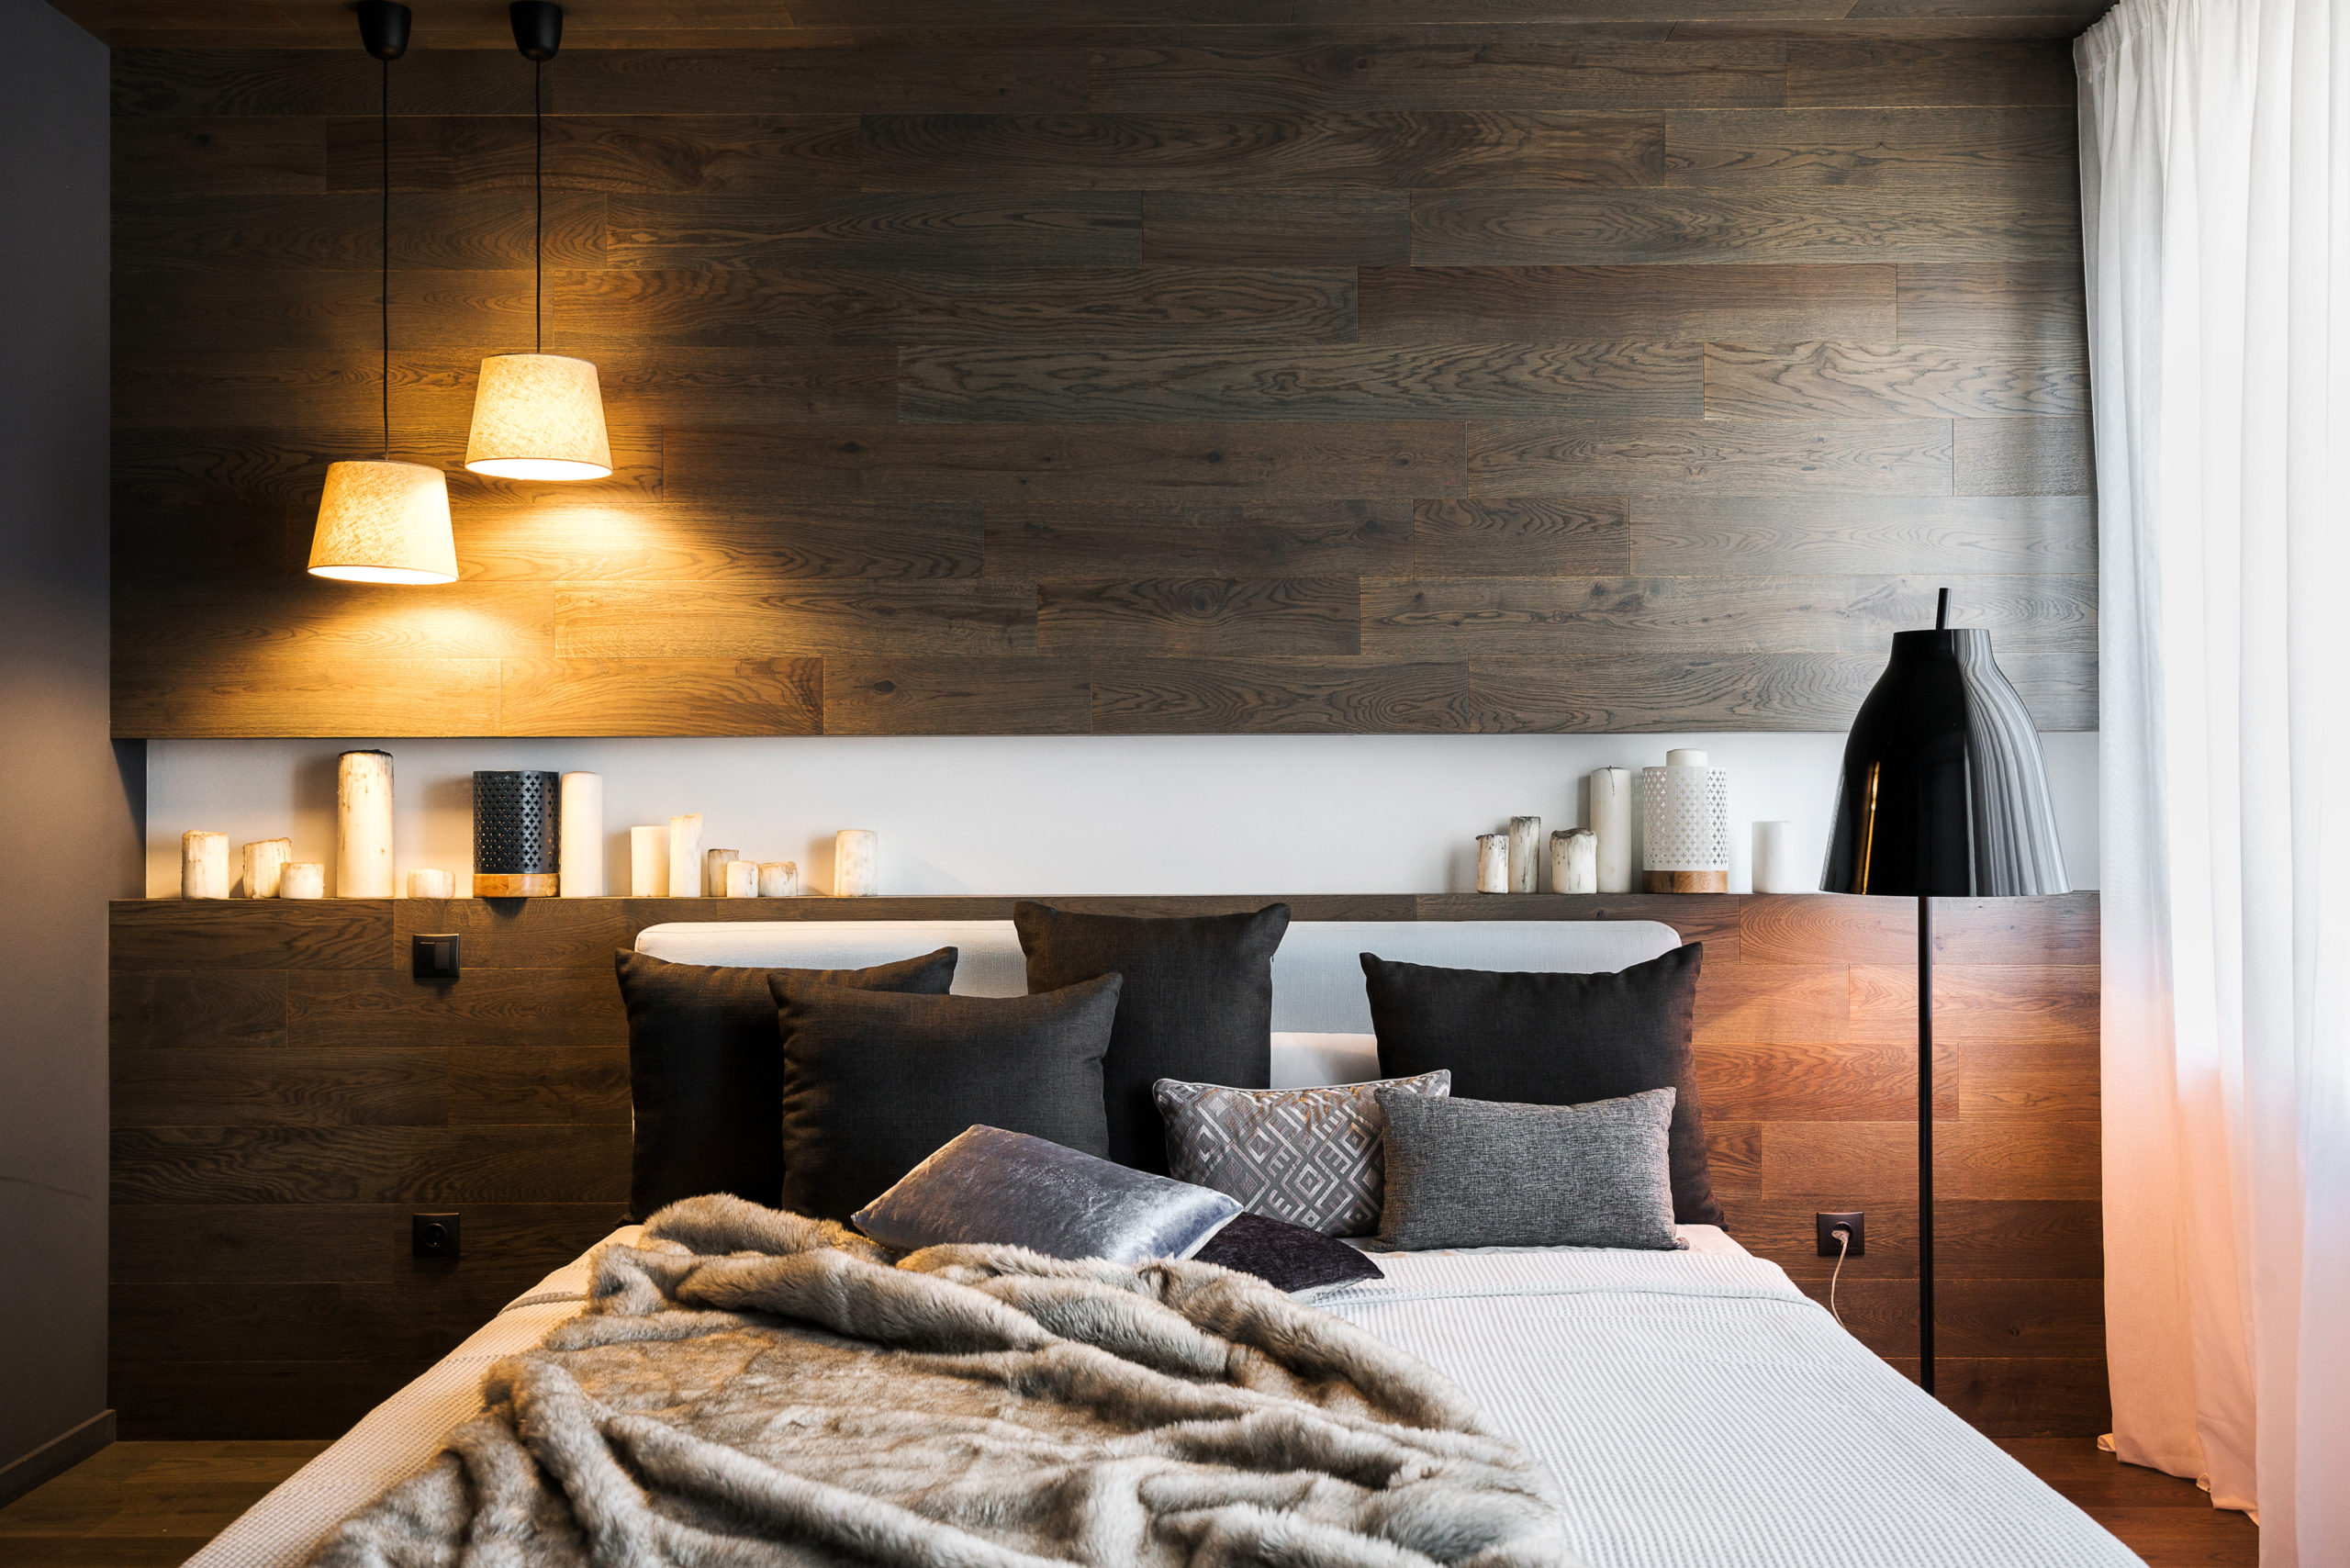 The interior of a stylish bedroom in dark colors. Wooden walls,